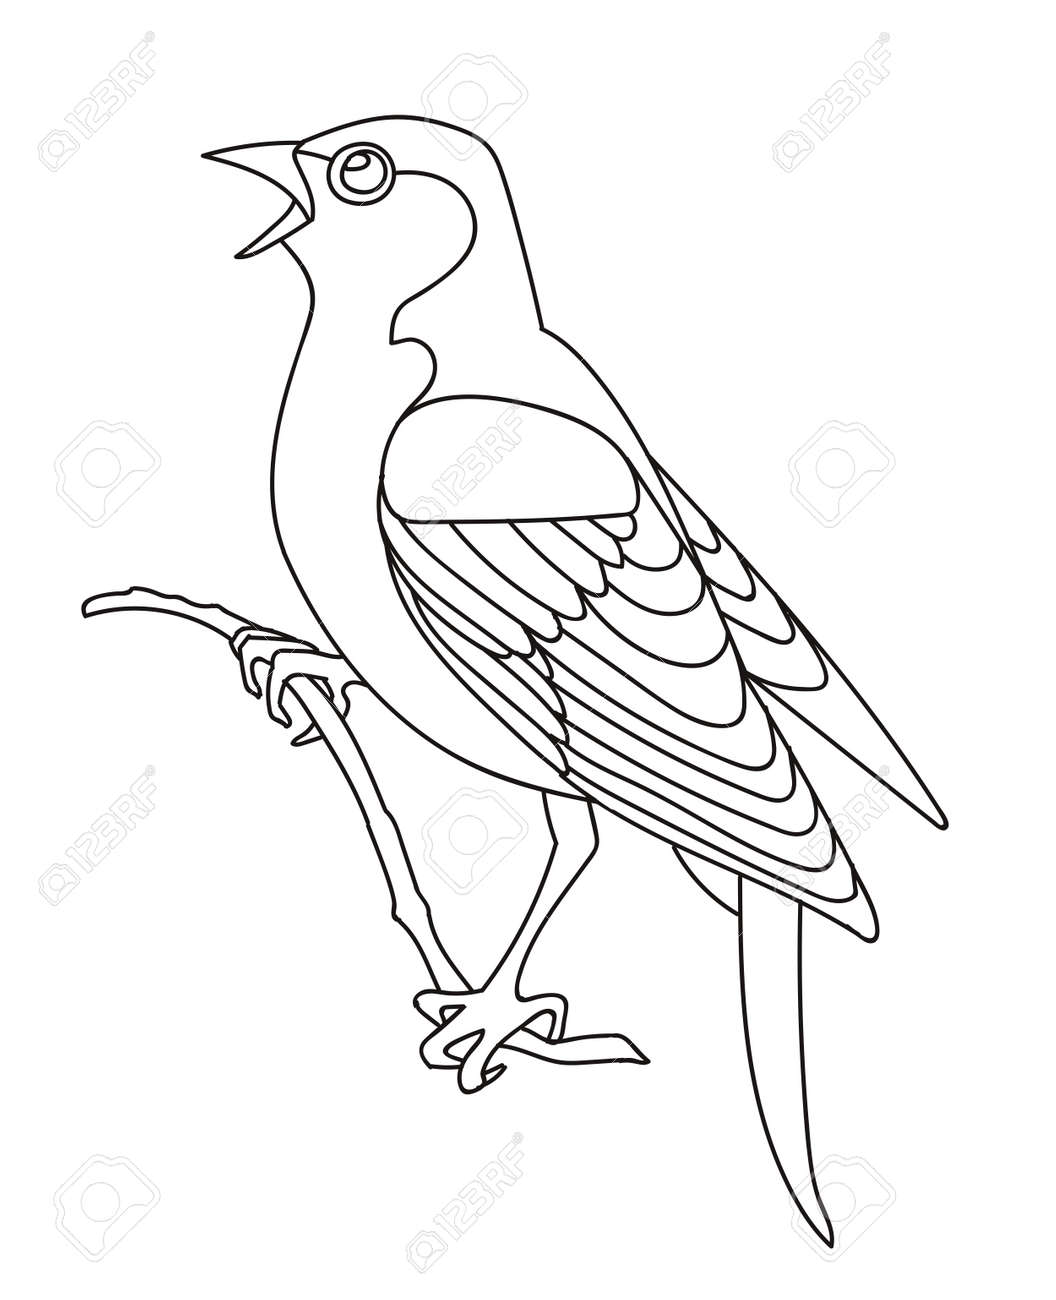 Vector line art monochrome song bird nightingale sitting on branch black contour illustration isolated on white background stock illustration for coloring book design print t